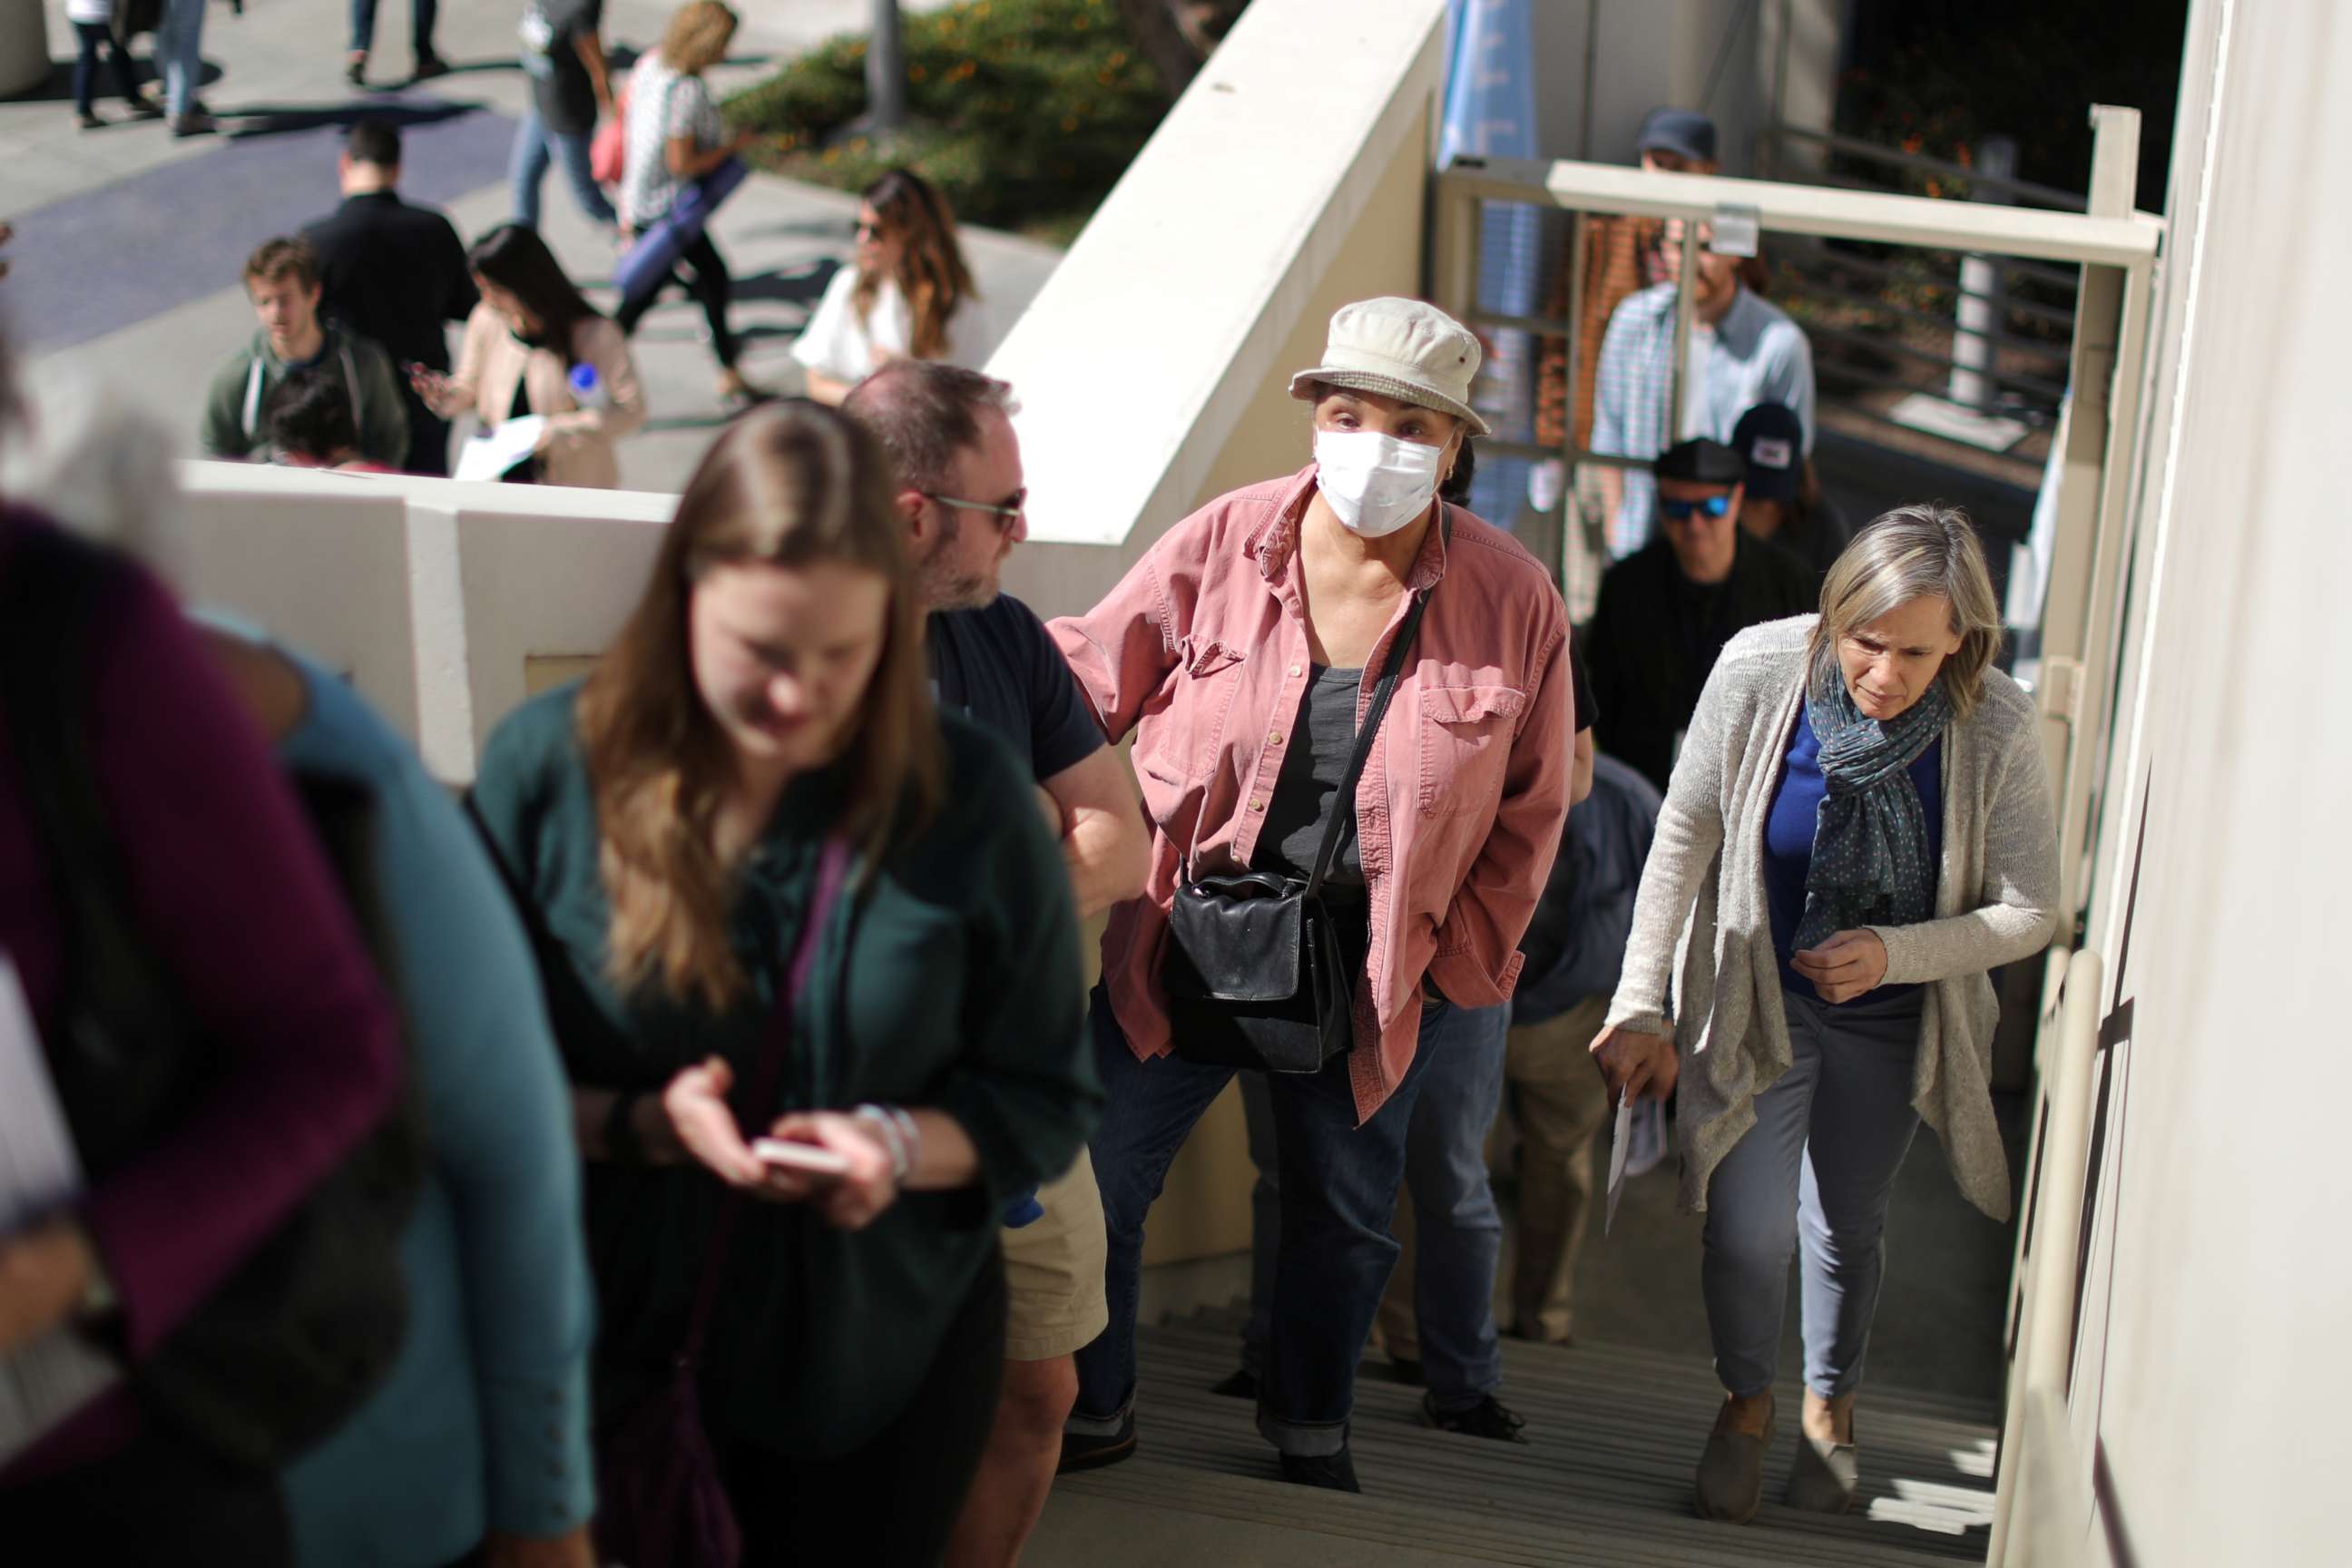 PHOTO: A woman wears a face mask as she lines up to vote at a polling station on Super Tuesday in Santa Monica, Calif., March 3, 2020.